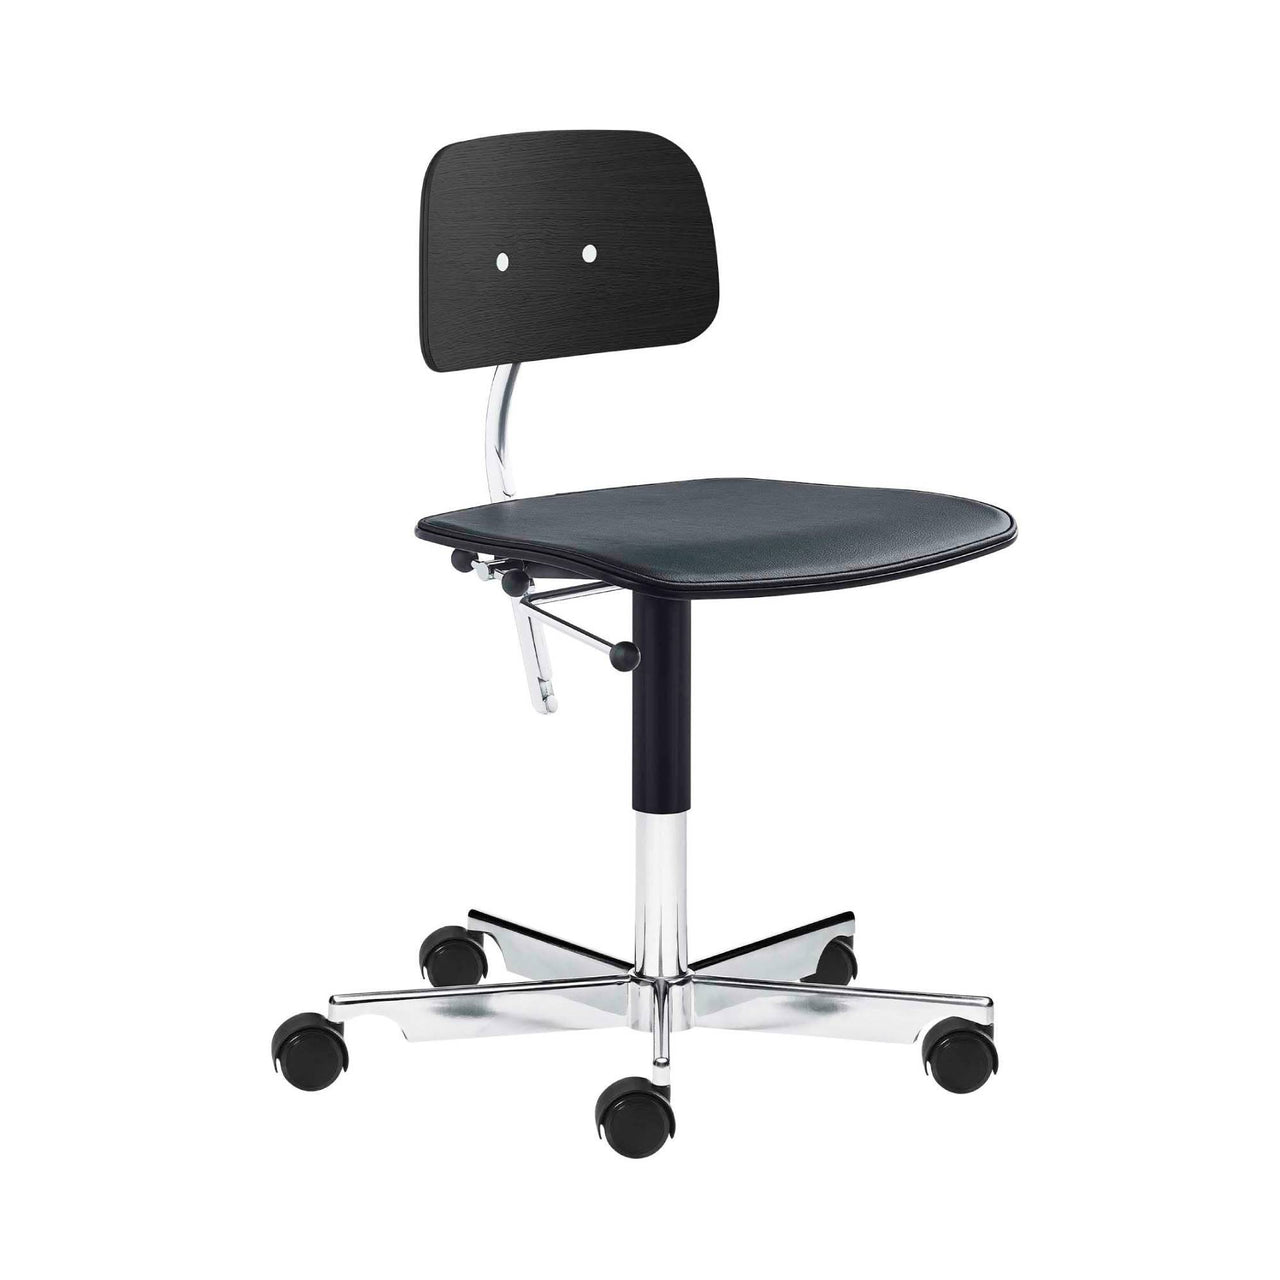 Kevi 2533 Chair: Size A + Seat Upholstered + Lazure - Black